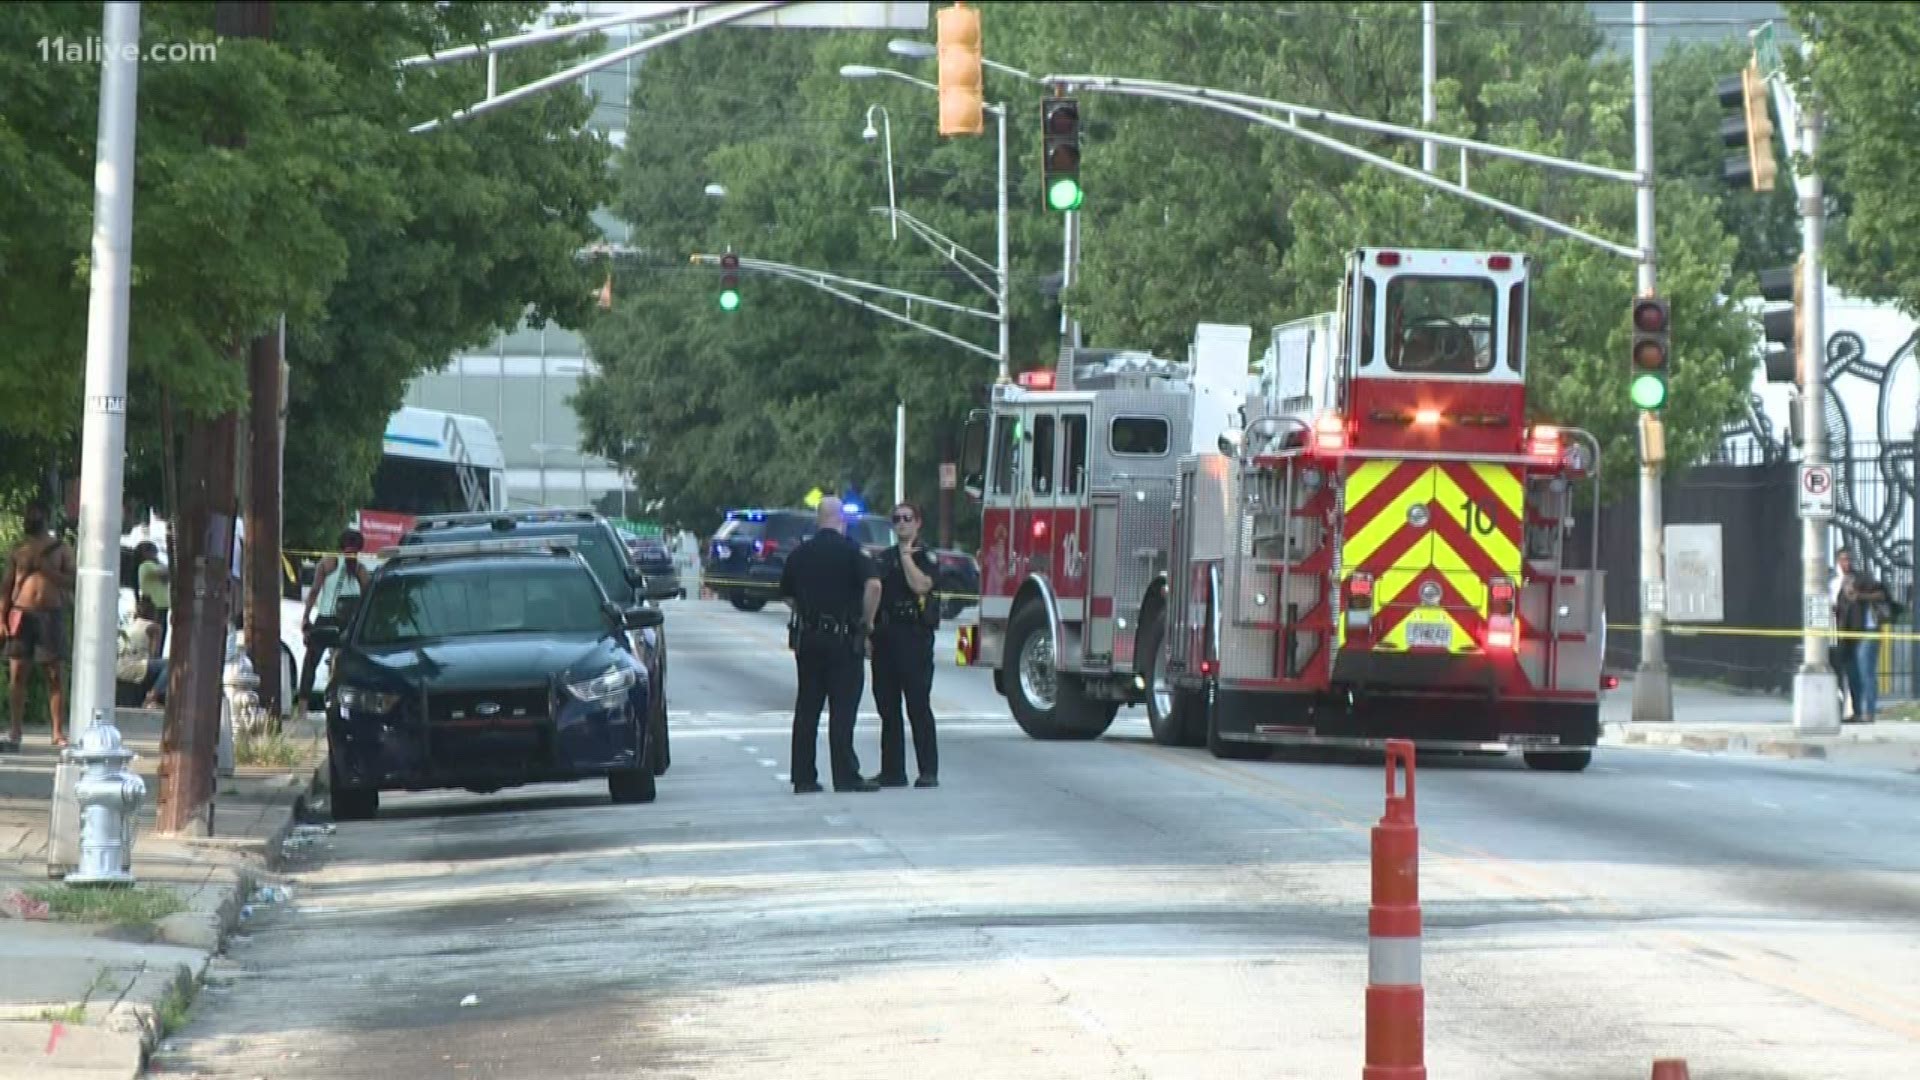 A threatening call and a suspicious bag led t a SWAT unit response in Atlanta